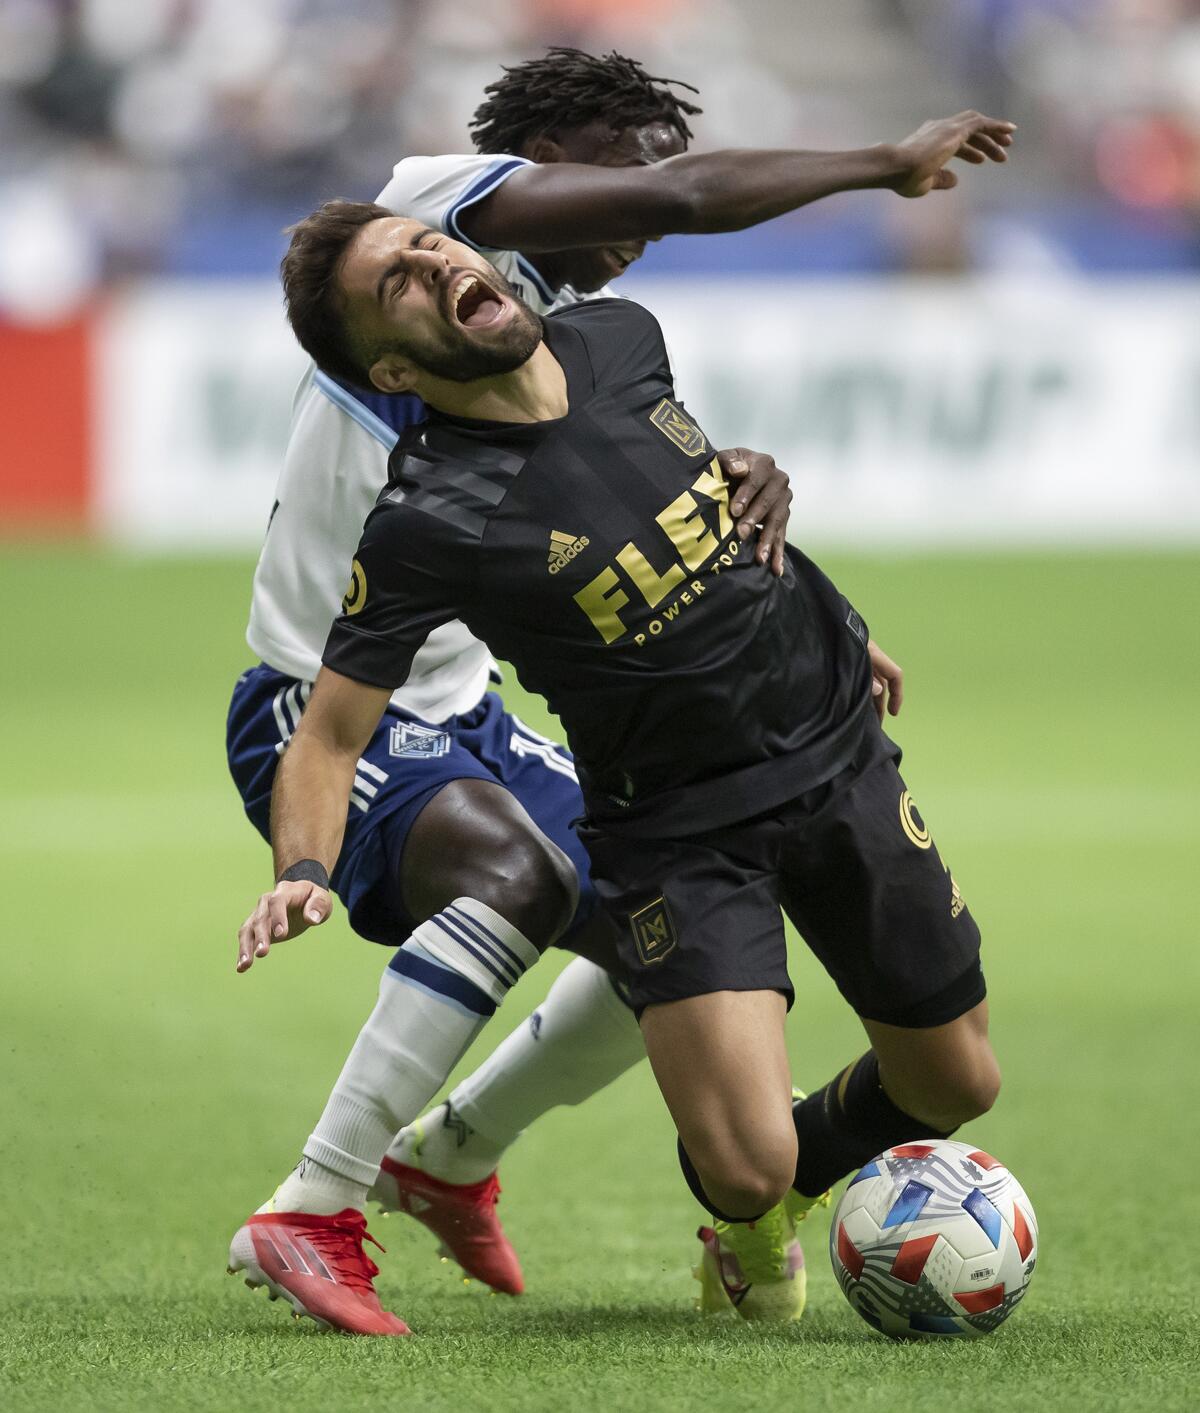 Los Angeles FC's Diego Rossi, front, reacts after being taken off the ball by Vancouver Whitecaps' Janio Bikel during the first half of an MLS soccer match Saturday, Aug. 21, 2021, in Vancouver, British Columbia. (Darryl Dyck/The Canadian Press via AP)